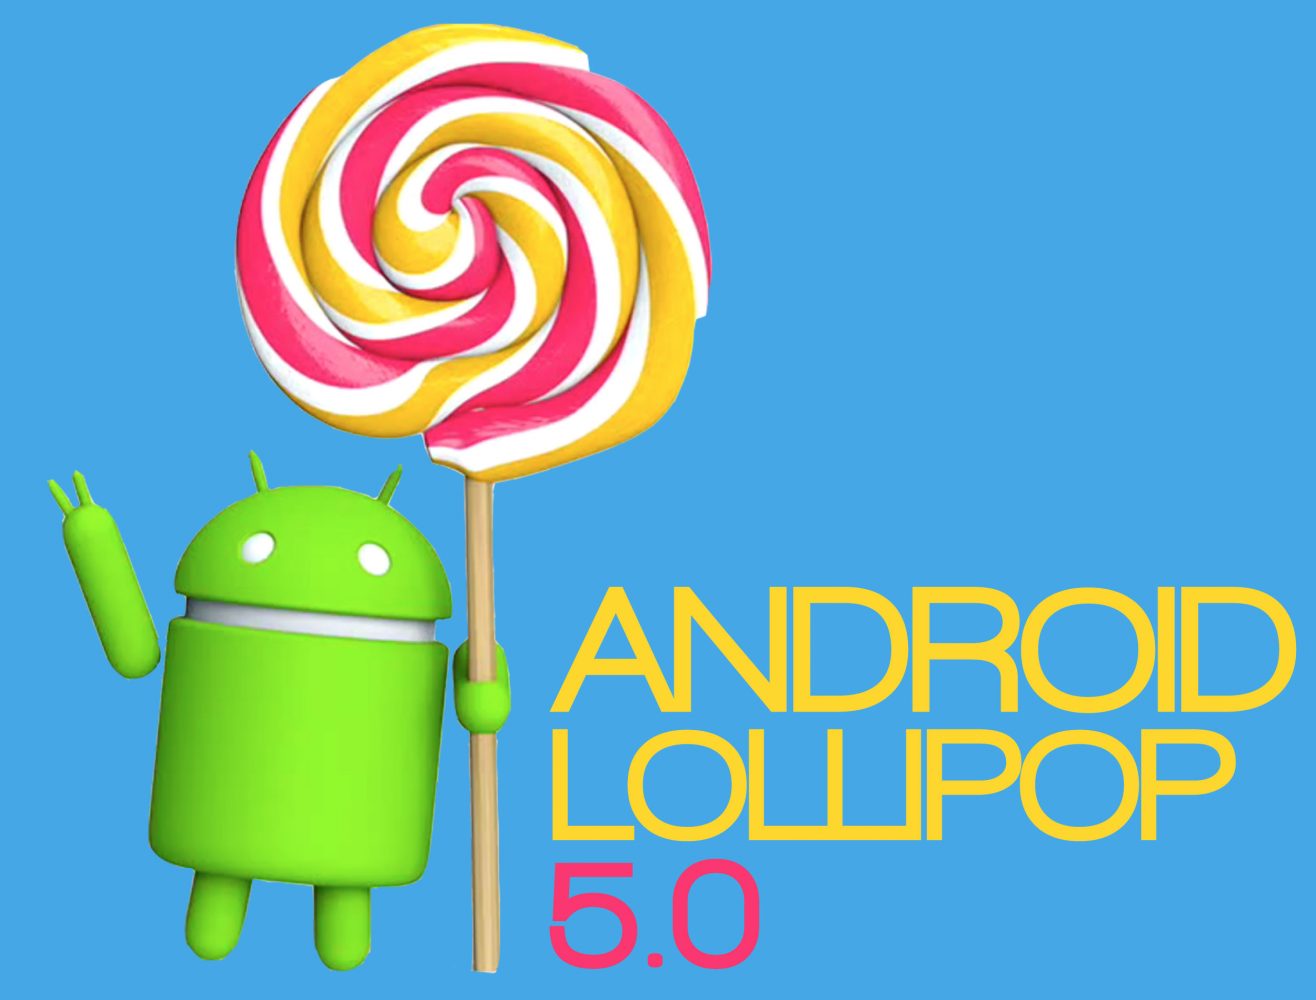 Google+introduces+Android+Lollipop+5.0